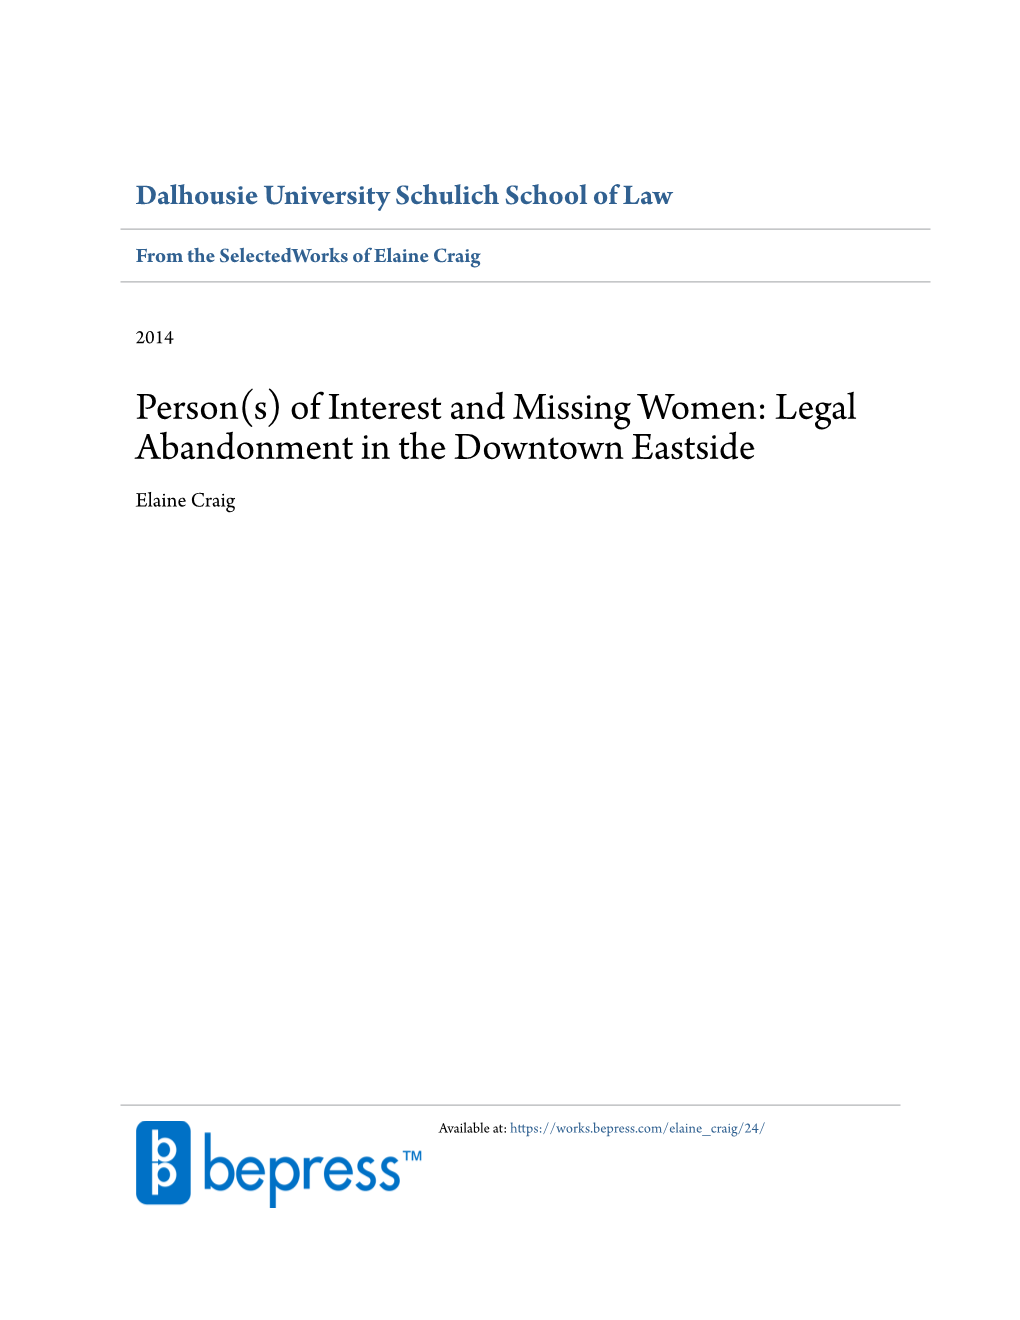 Person(S) of Interest and Missing Women: Legal Abandonment in the Downtown Eastside Elaine Craig